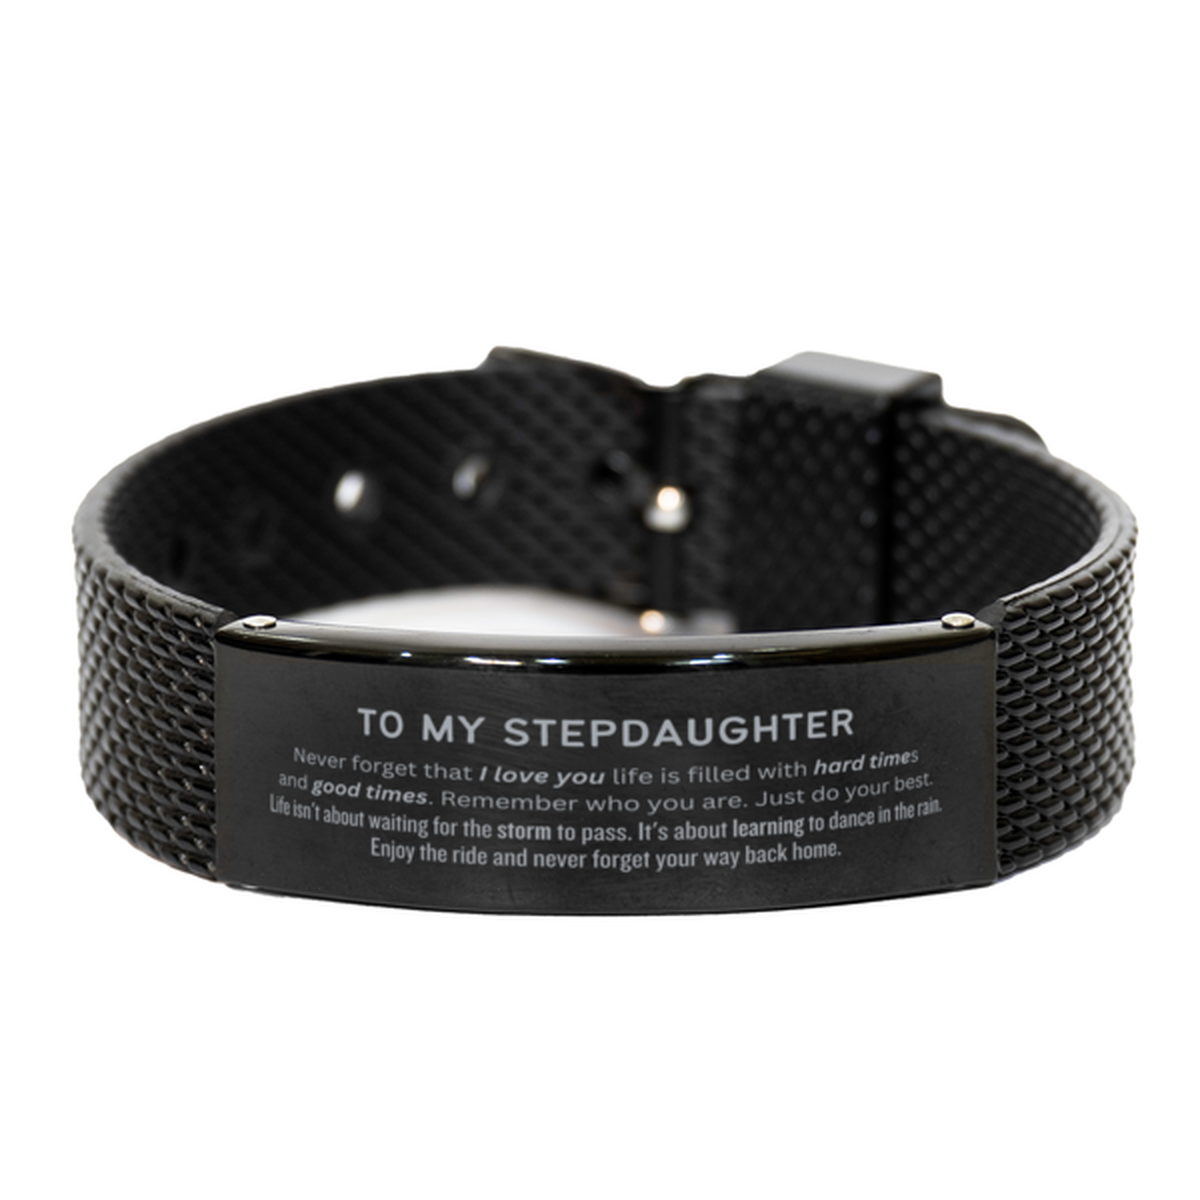 Christmas Stepdaughter Black Shark Mesh Bracelet Gifts, To My Stepdaughter Birthday Thank You Gifts For Stepdaughter, Graduation Unique Gifts For Stepdaughter To My Stepdaughter Never forget that I love you life is filled with hard times and good times. R